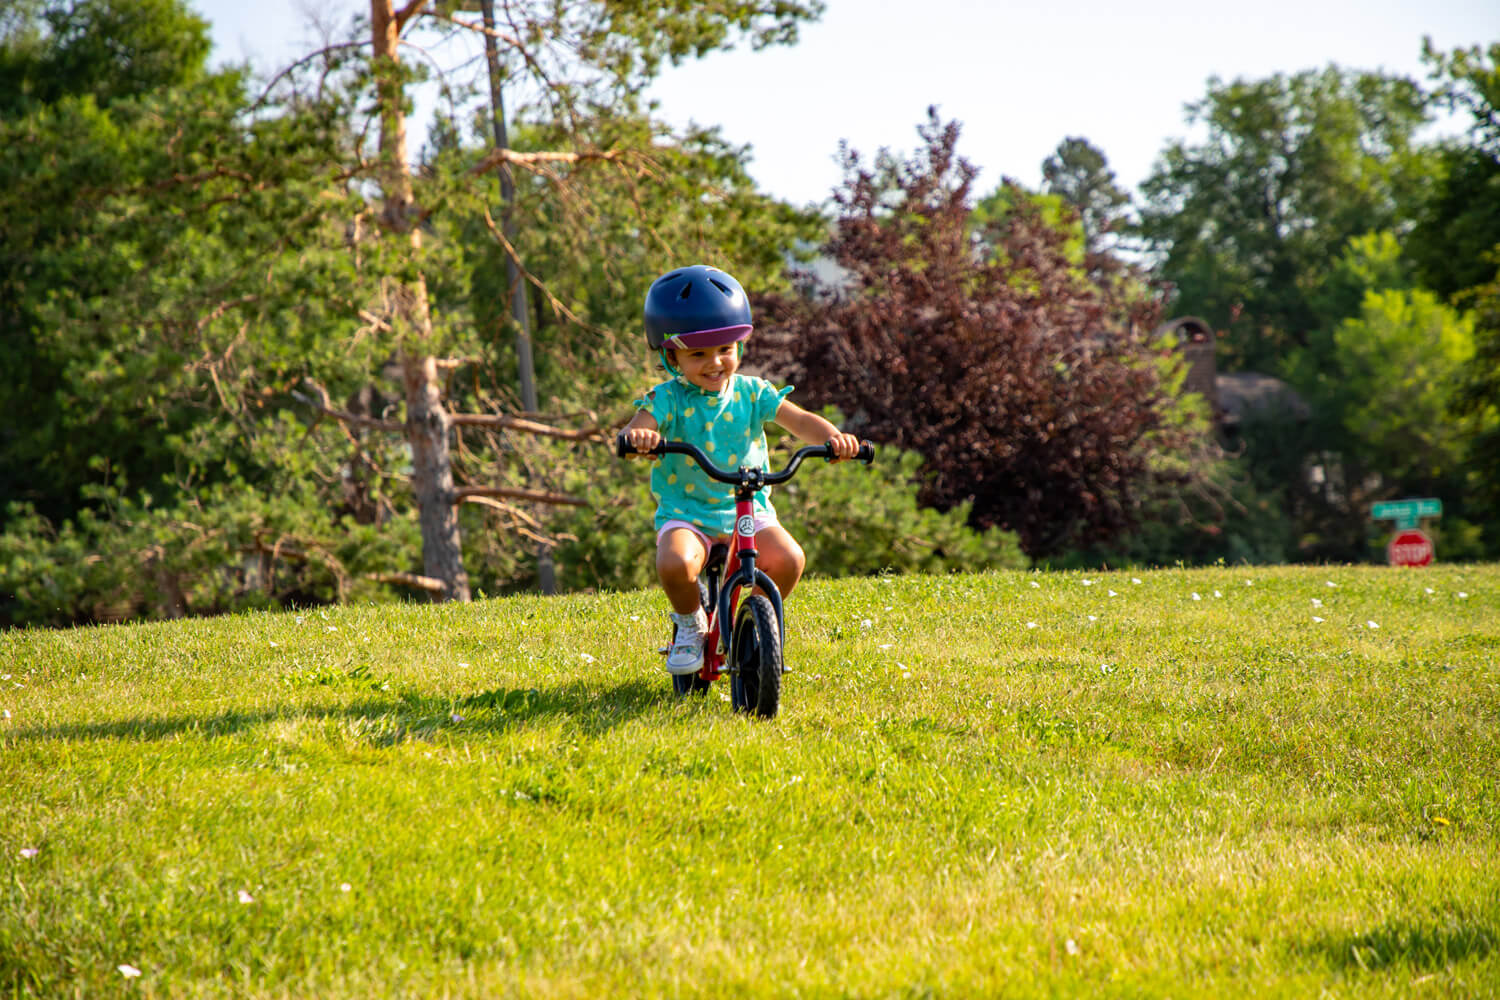 A girl on a red balance bike with Strider High Rise Wide Handlebars rides down a grassy hill